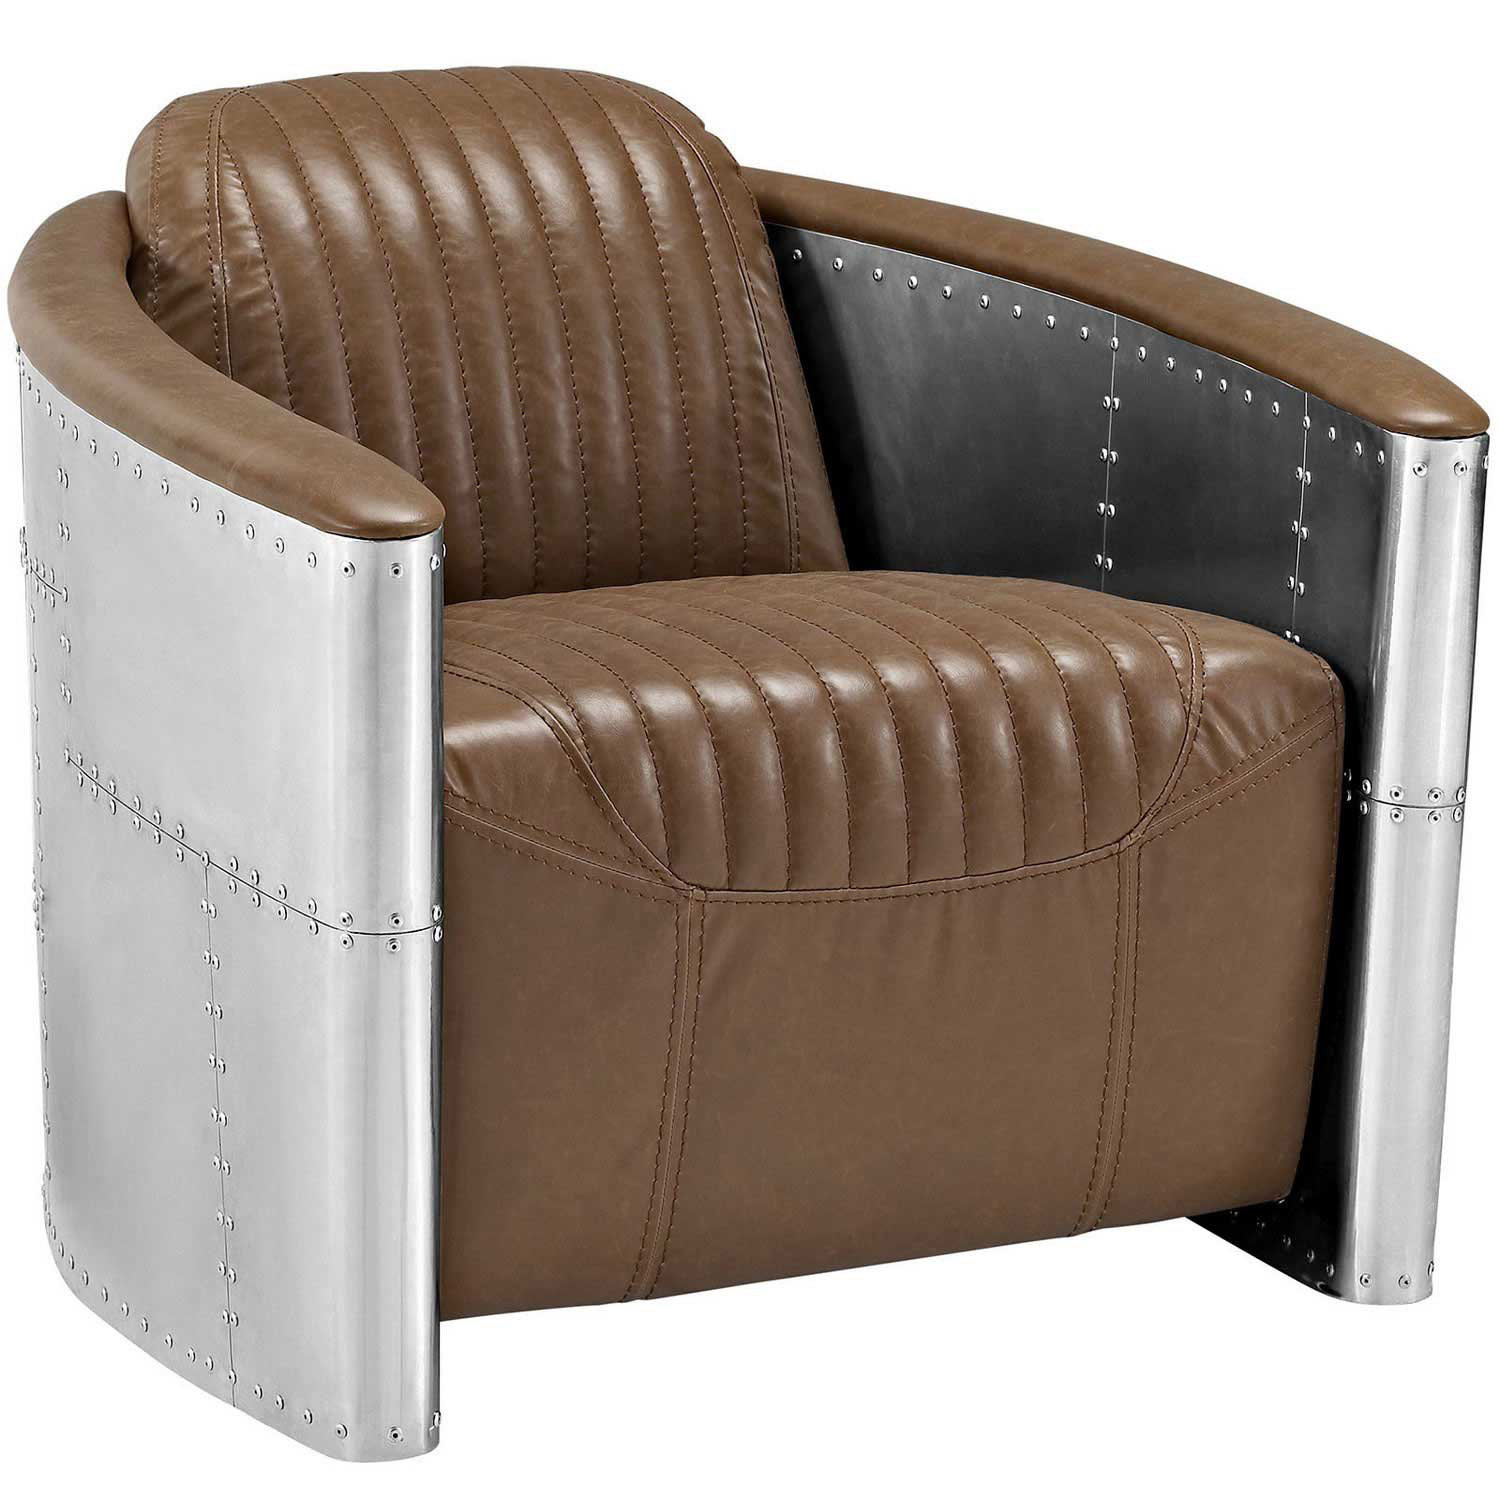 Modway Visibility Lounge Chair - Brown